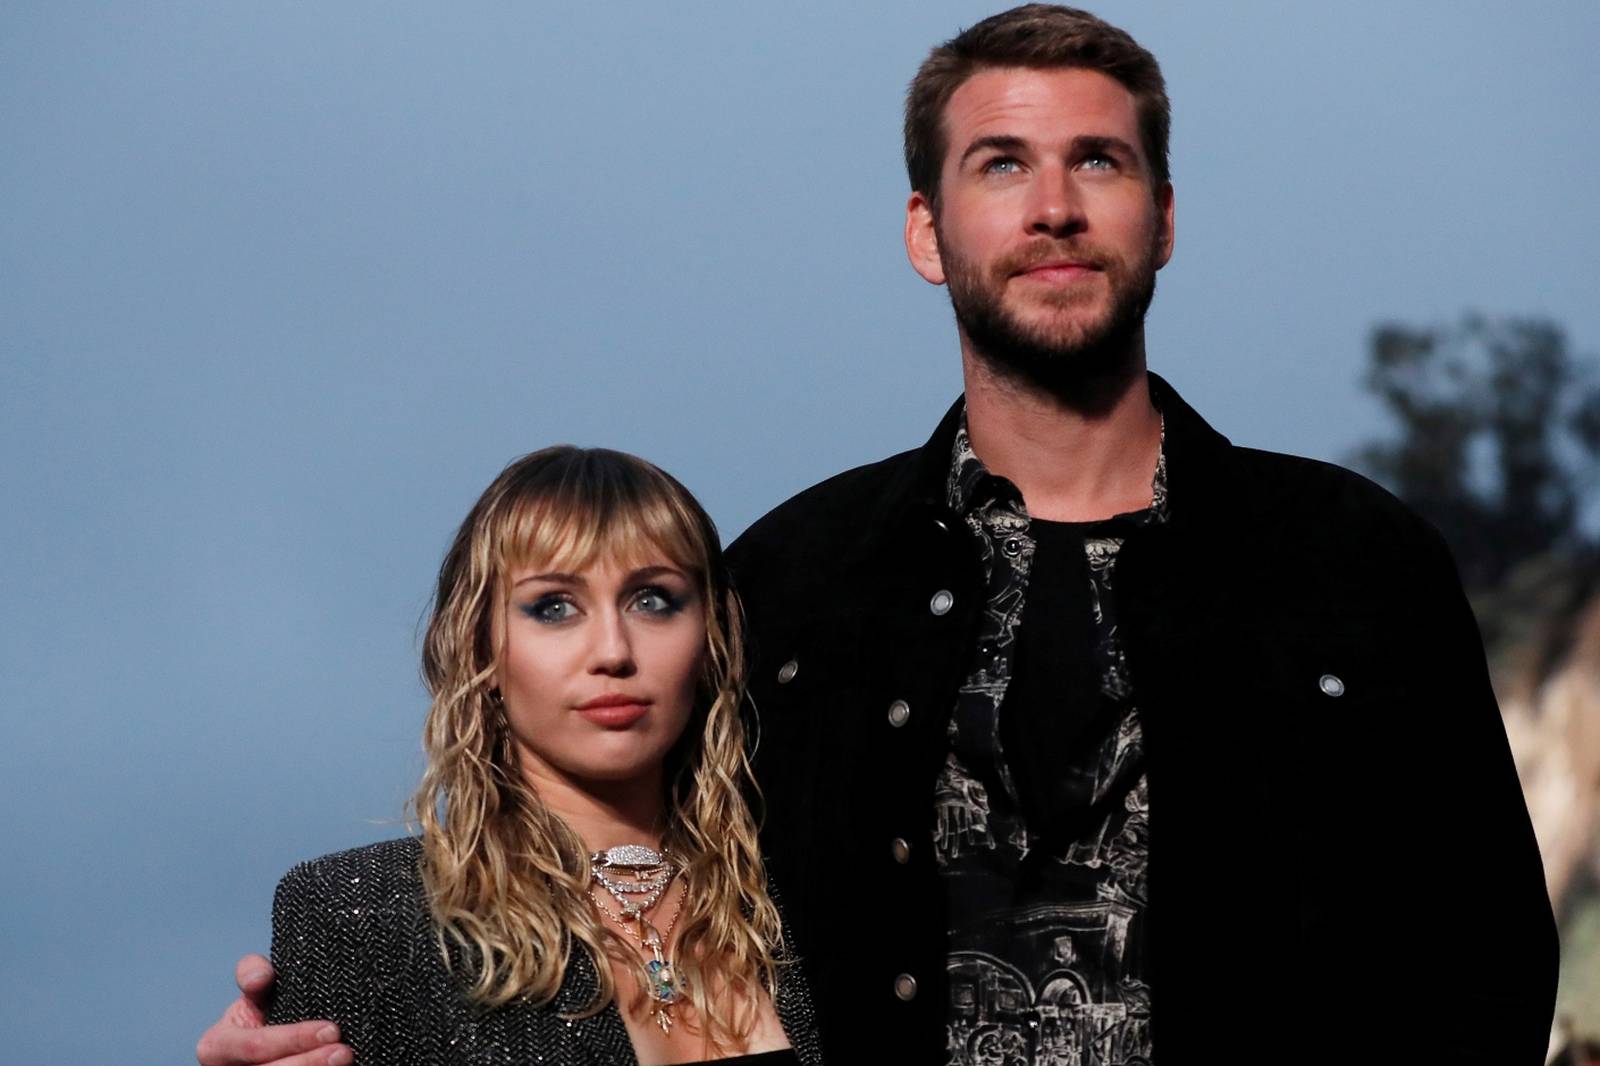 Miley Cyrus and Liam Hemsworth look on at the Saint Laurent Menâs Spring/Summer 2020 fashion show at Paradise Cove beach in Malibu